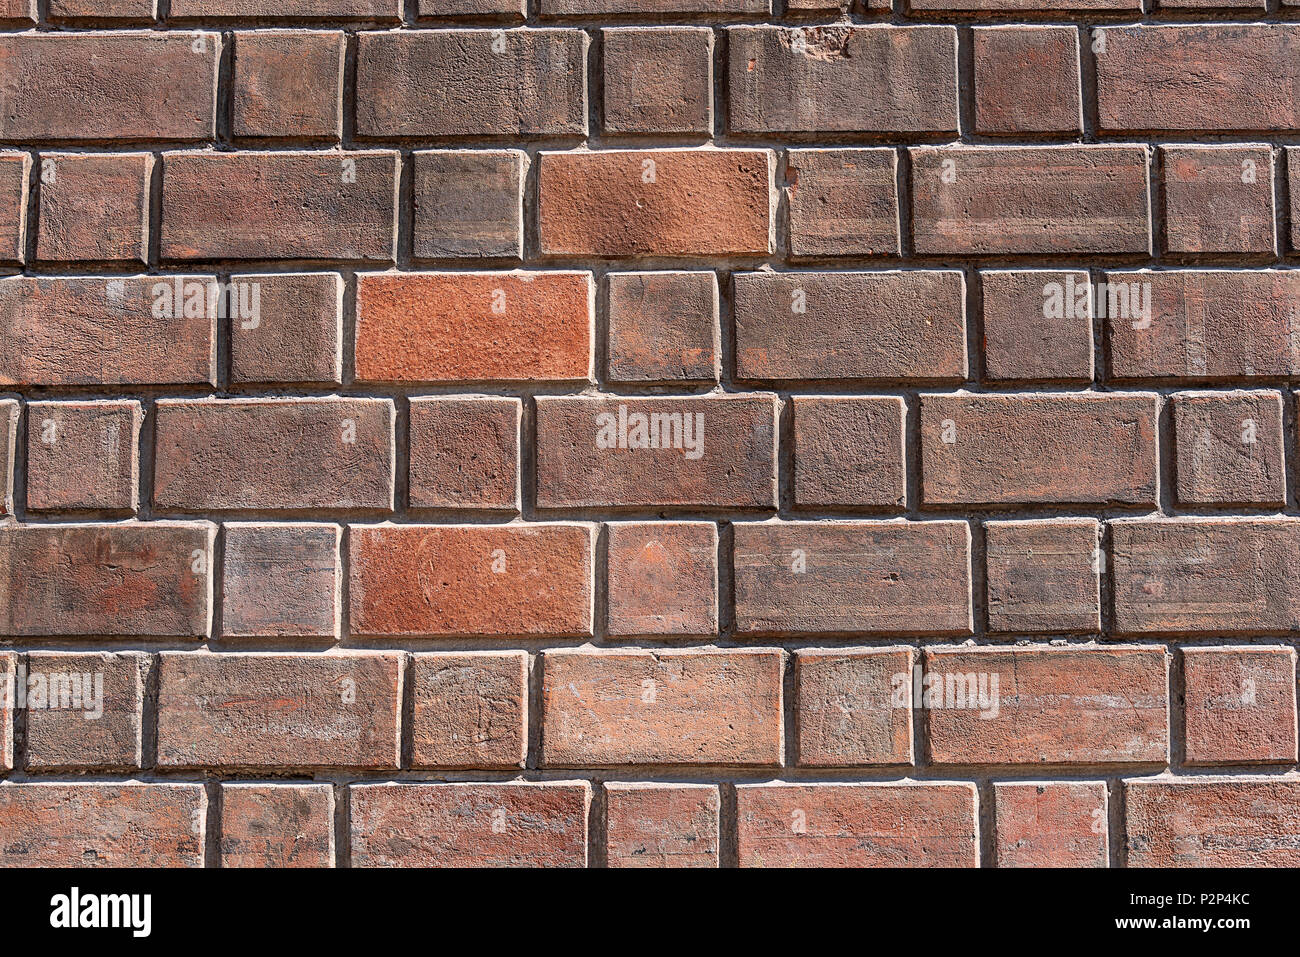 Background from a deep red brickwall Stock Photo